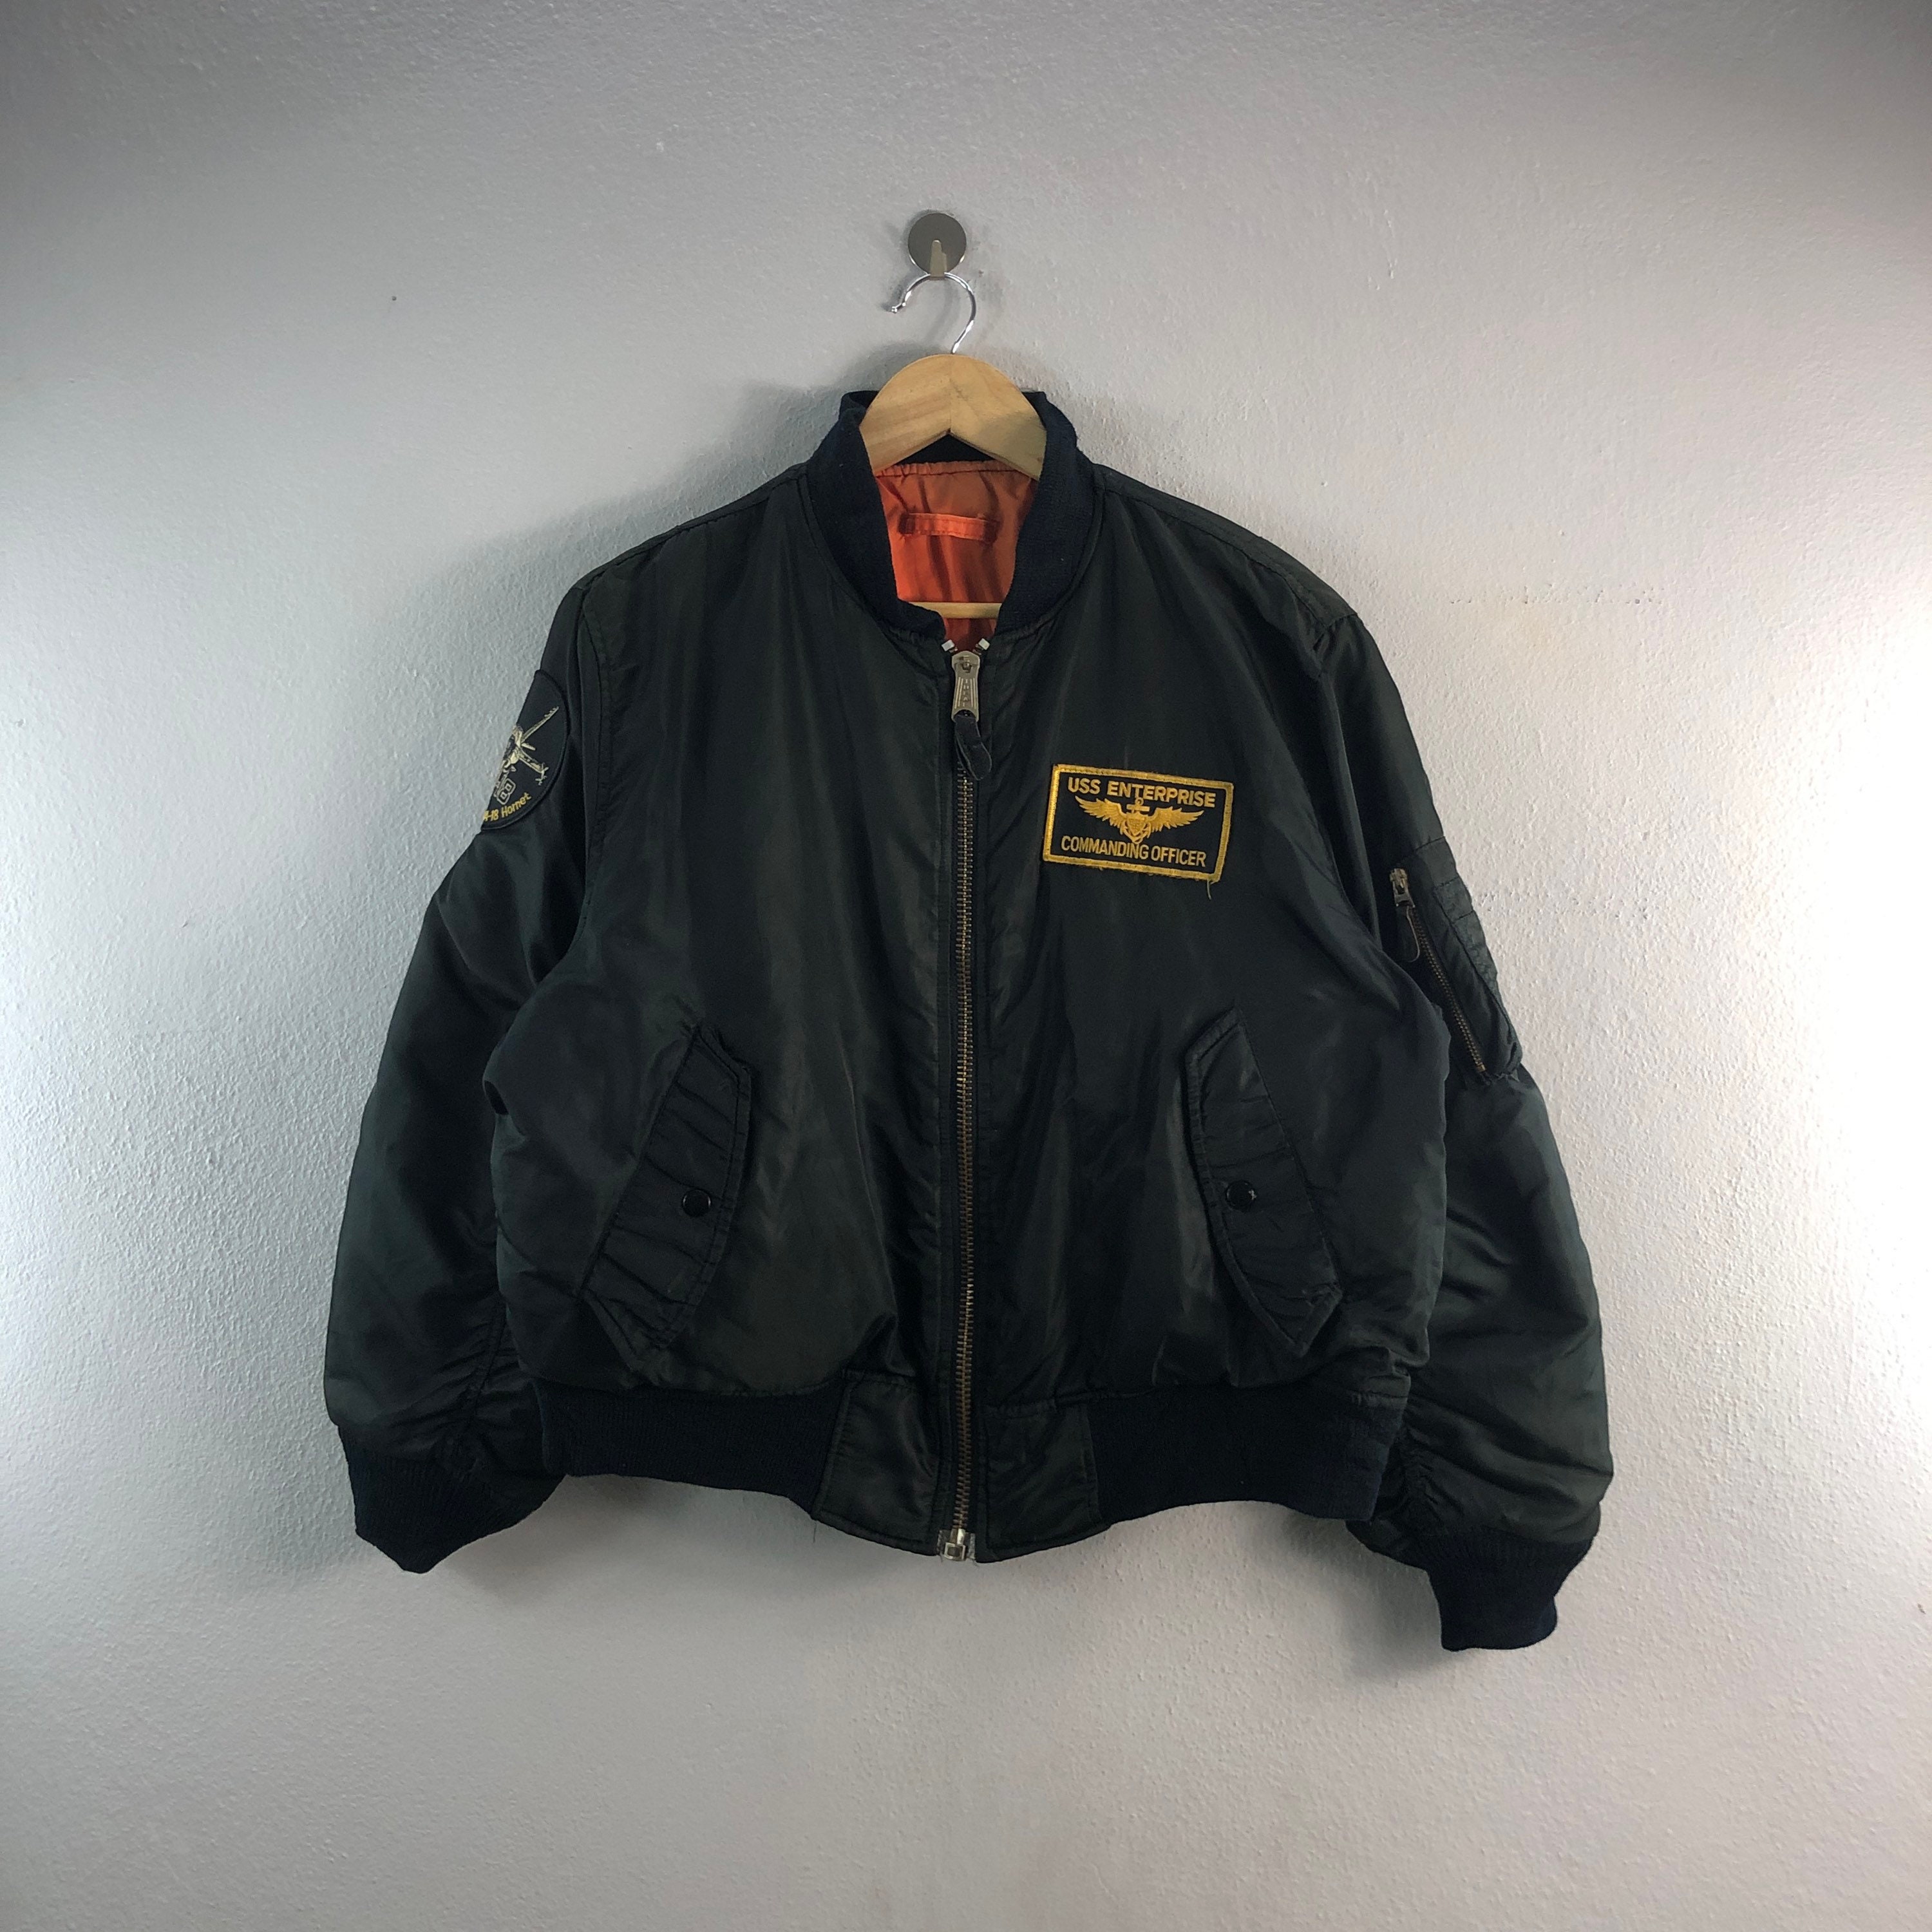 Vintage MA-1 Uss Enterprise Commanding Flying Flight Airforce FA-18 Hornet  Military Patches style Outfits Bombers windbreaker jacket Black